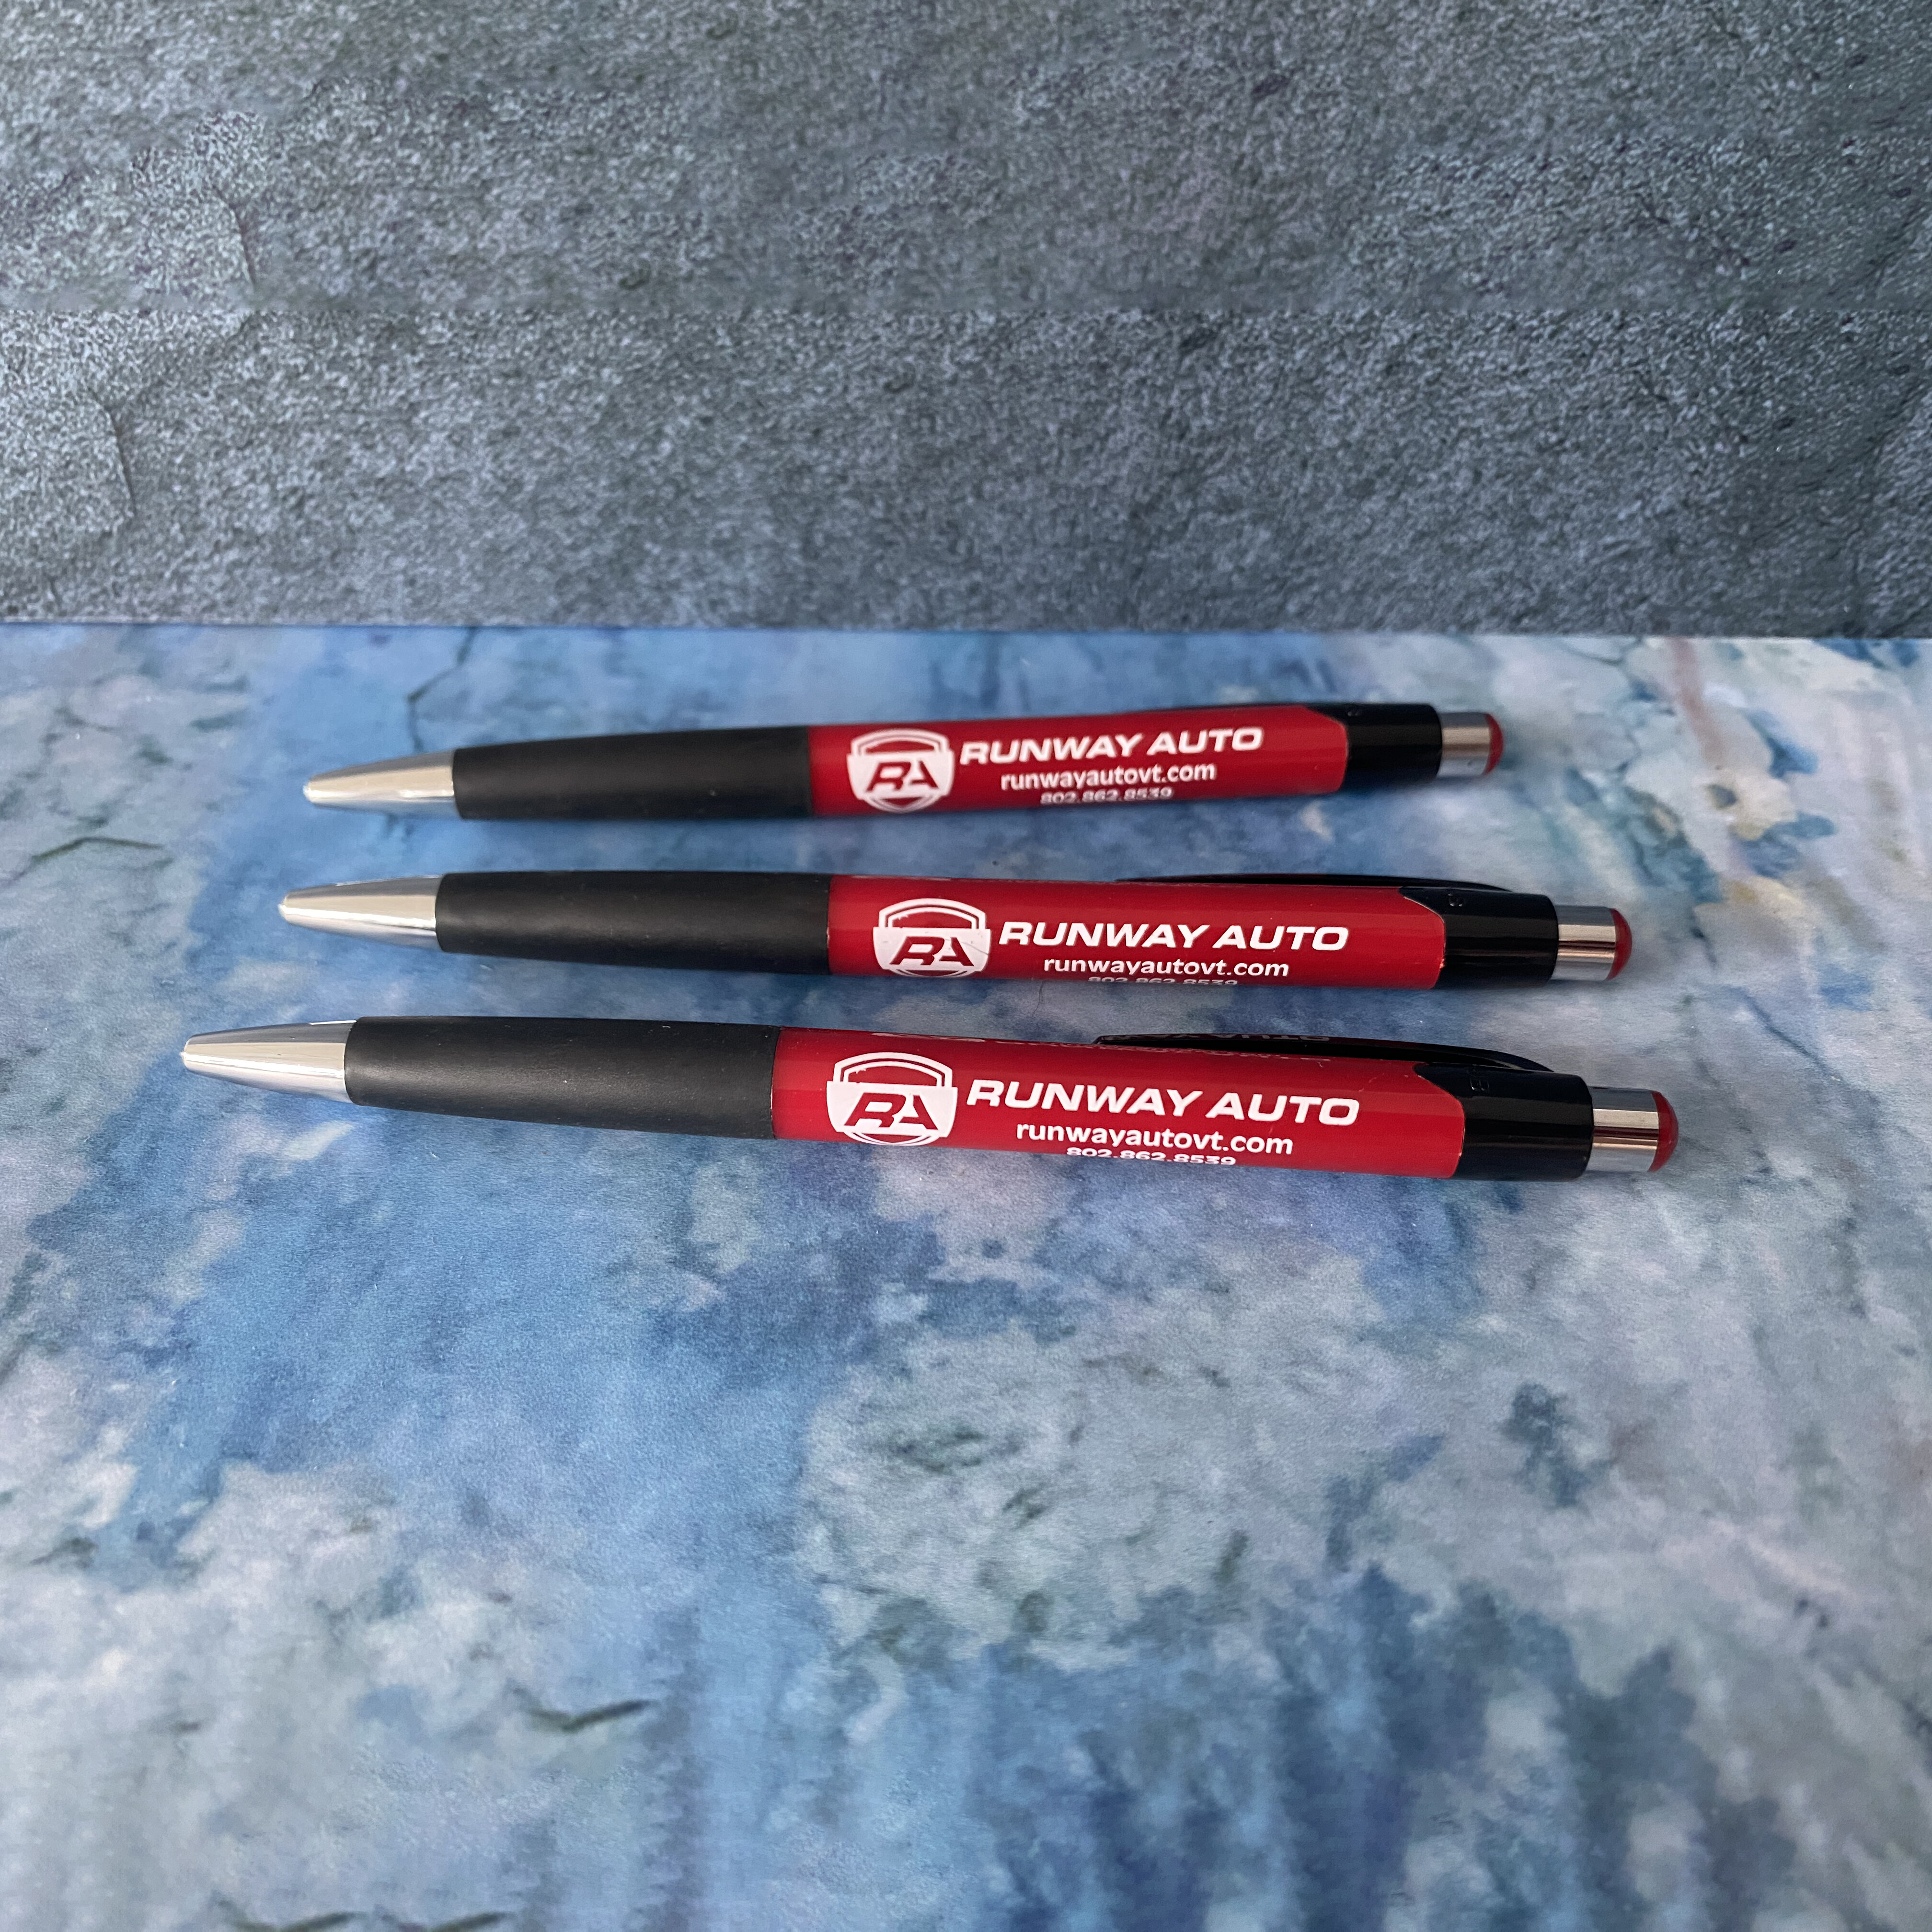 Promotional Pens for Runway Auto